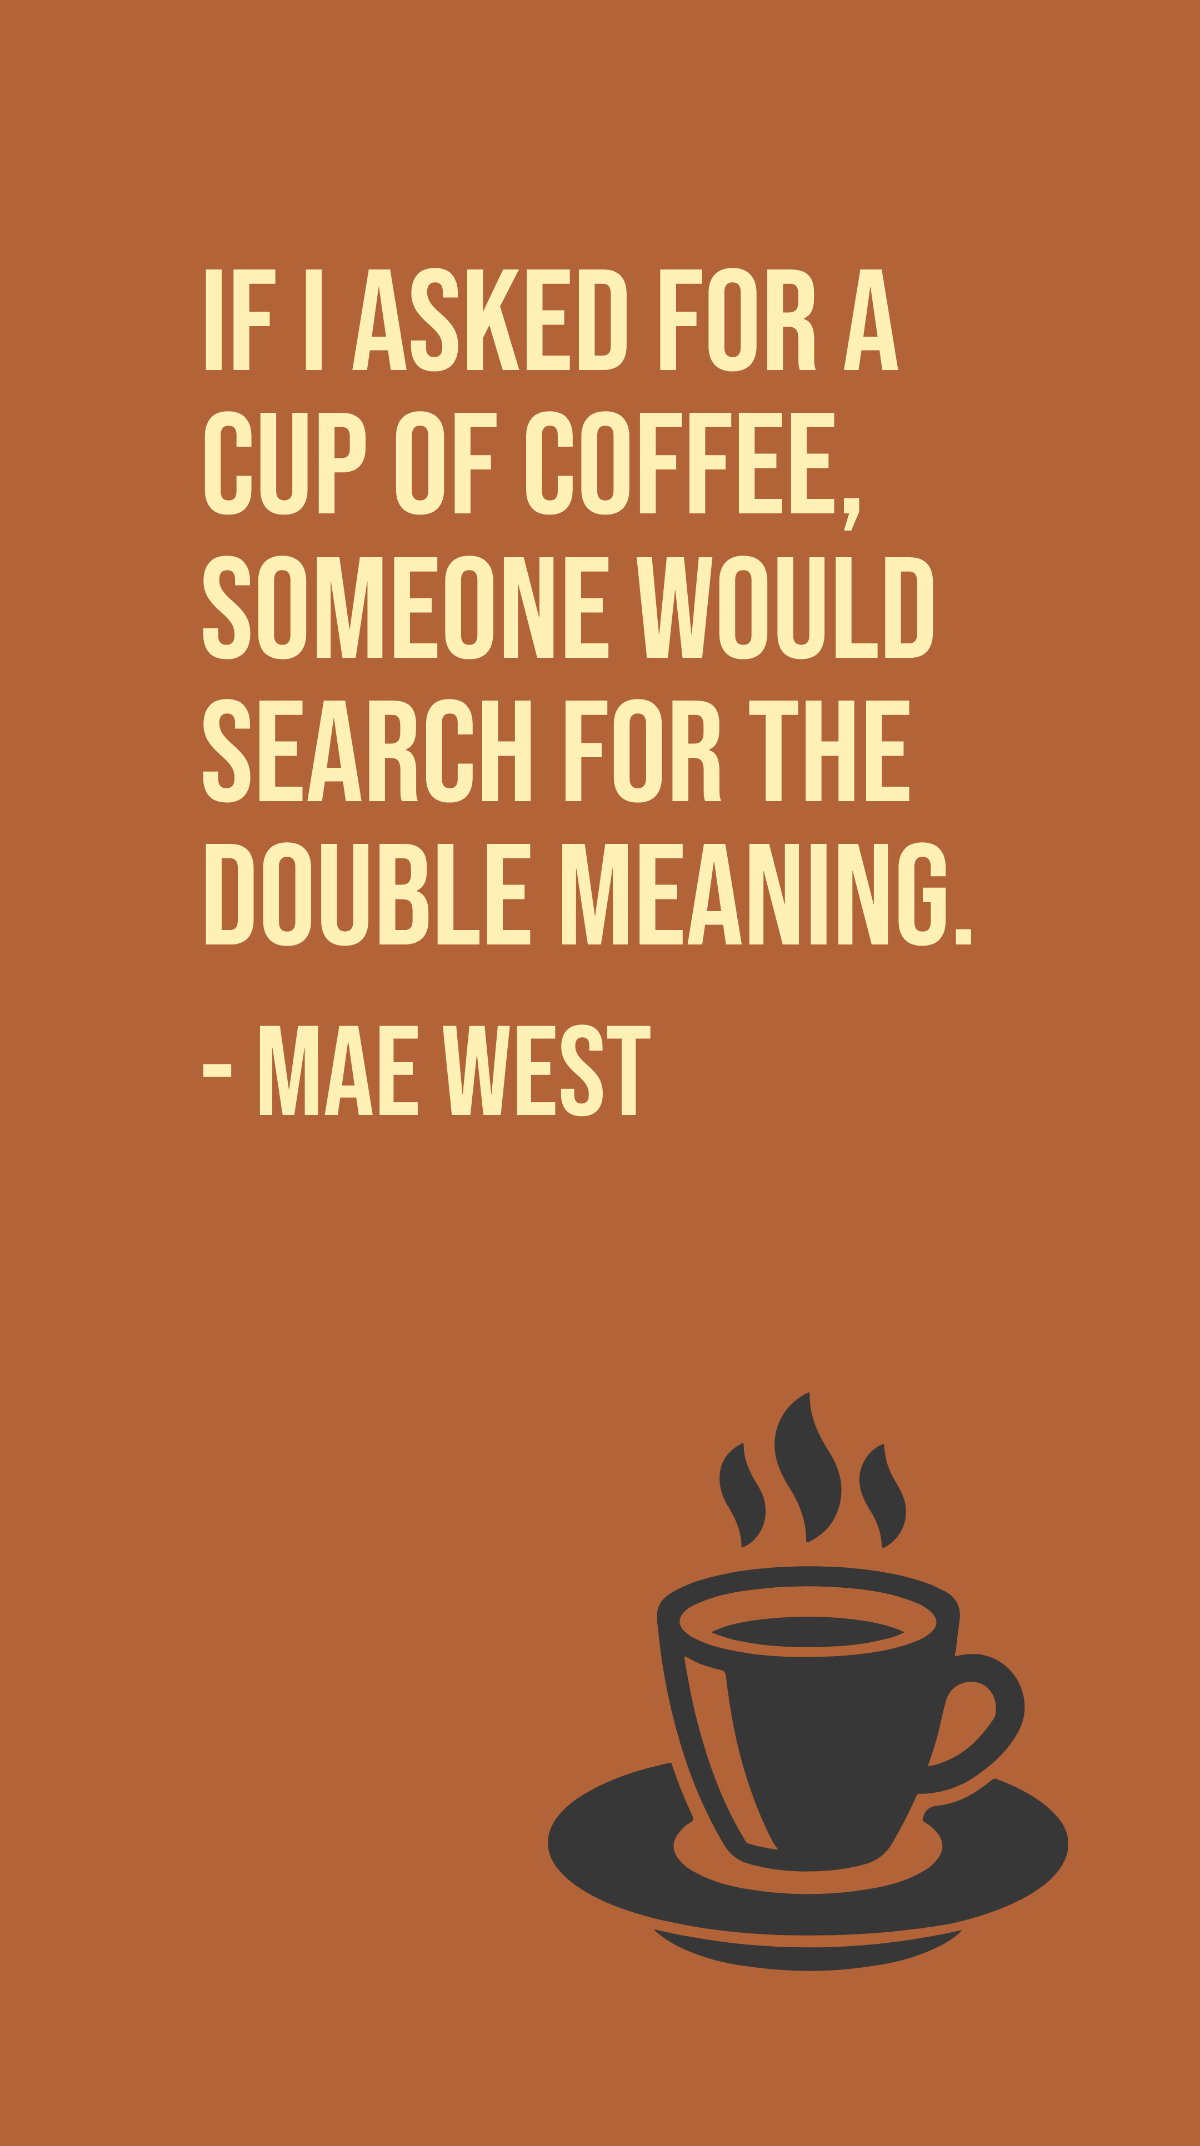 Mae West - If I asked for a cup of coffee, someone would search for the double meaning. Template